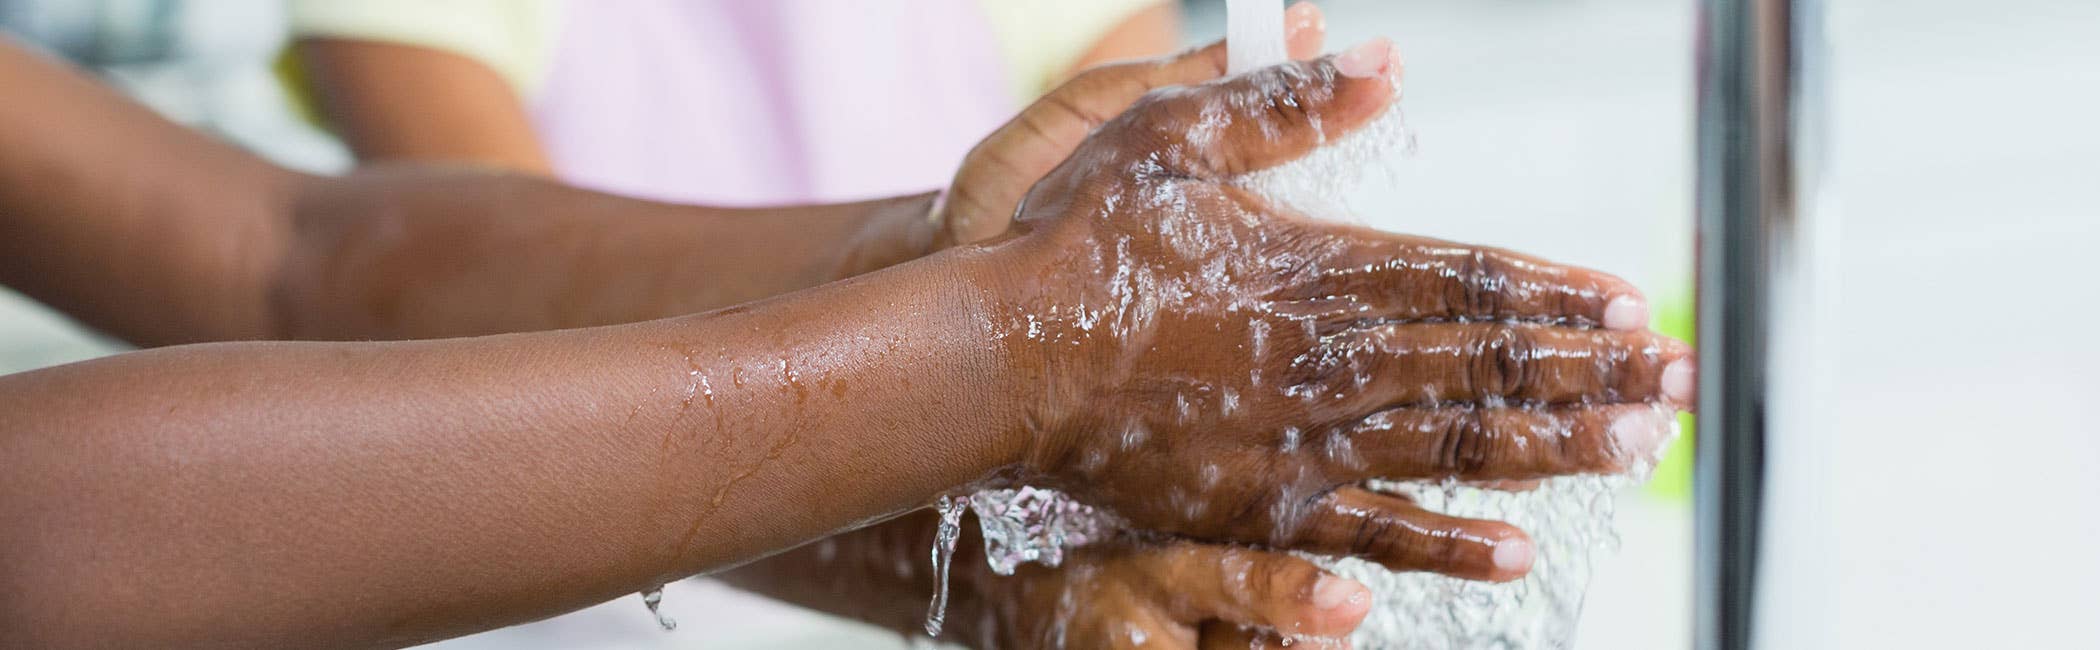 Hand Washing Steps | 7 NHS Techniques